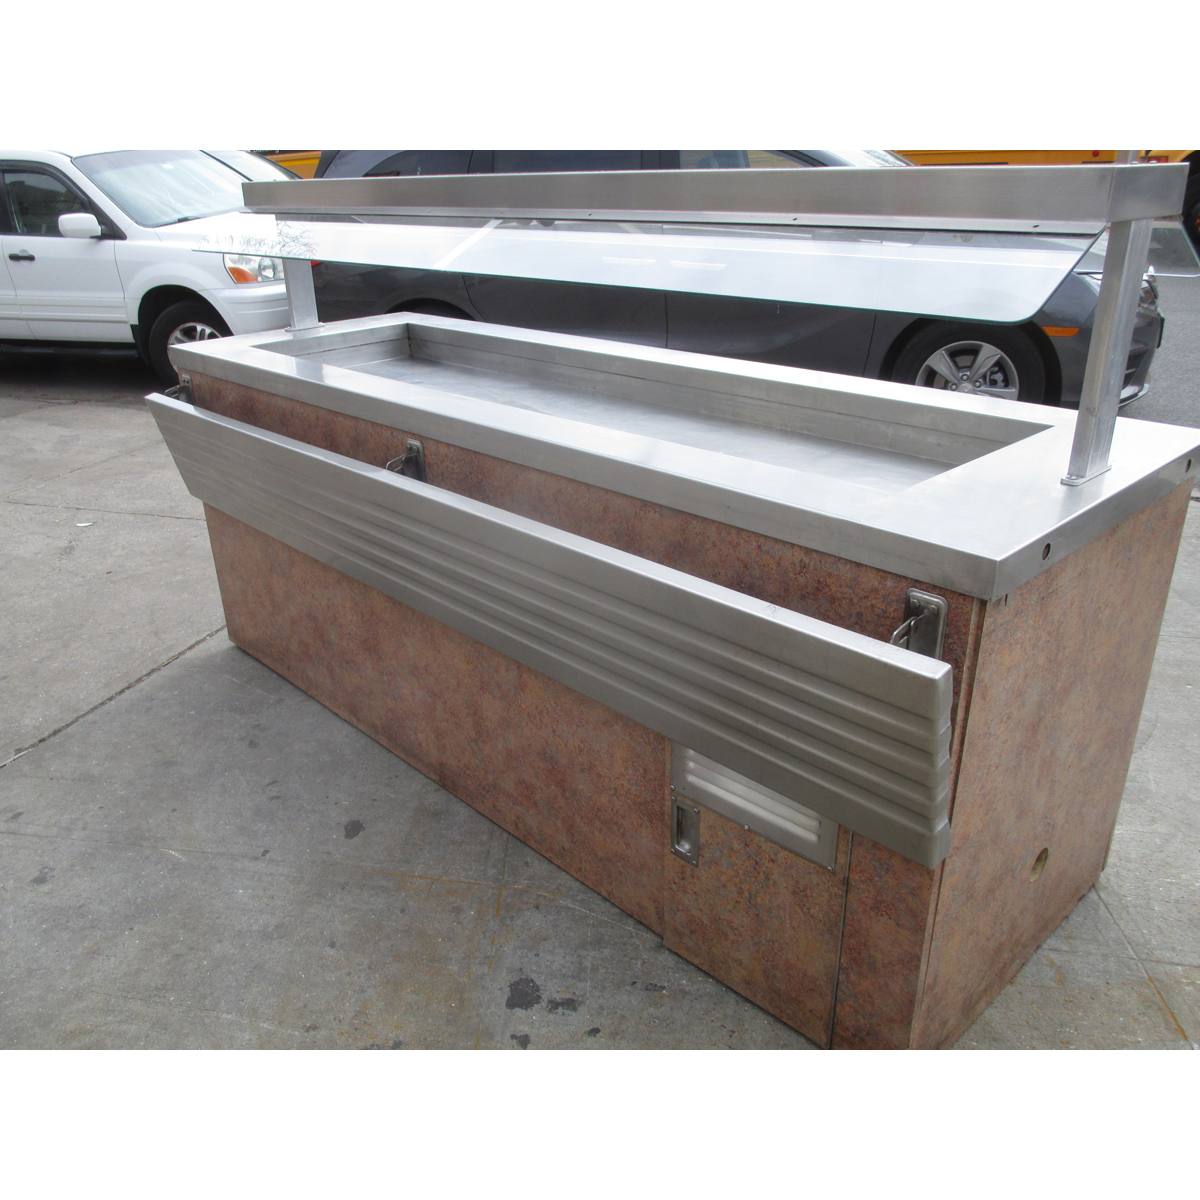 Piper Products Salad Bar Model 502-4R, Used Excellent Condition image 4